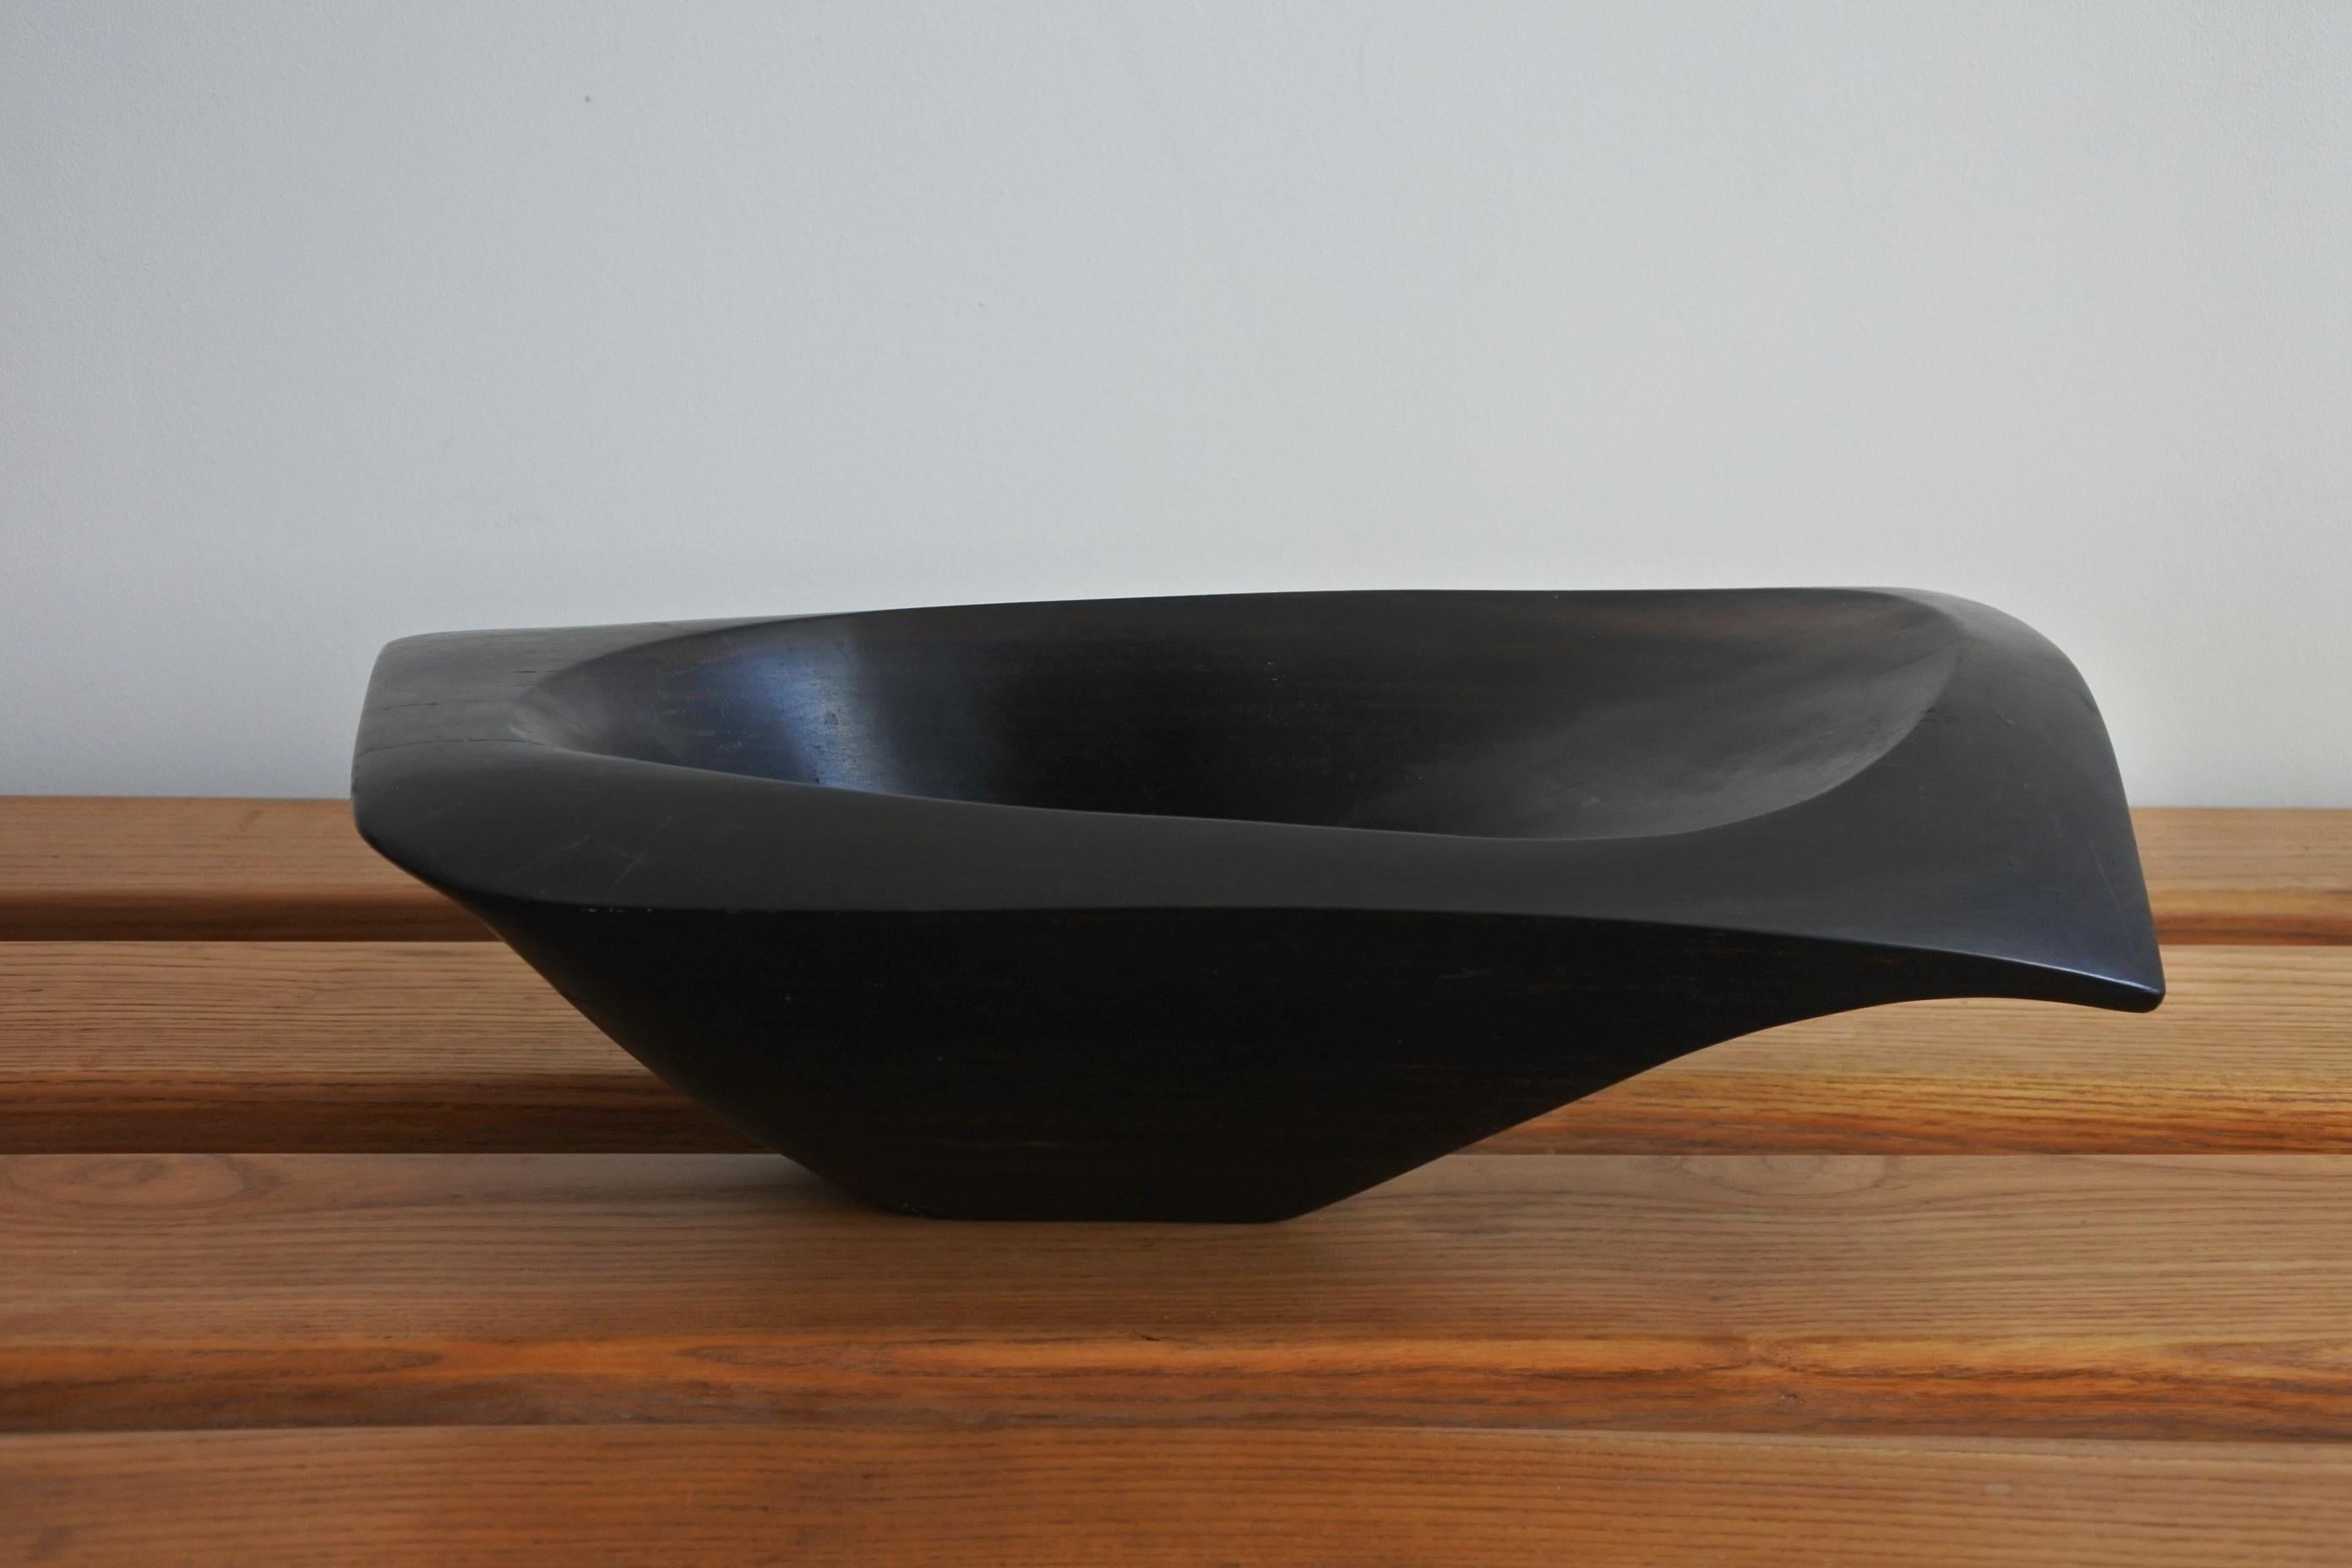 Large French Carved Ebony Wood Dish in the Style of Alexandre Noll, 1950s (Mitte des 20. Jahrhunderts)